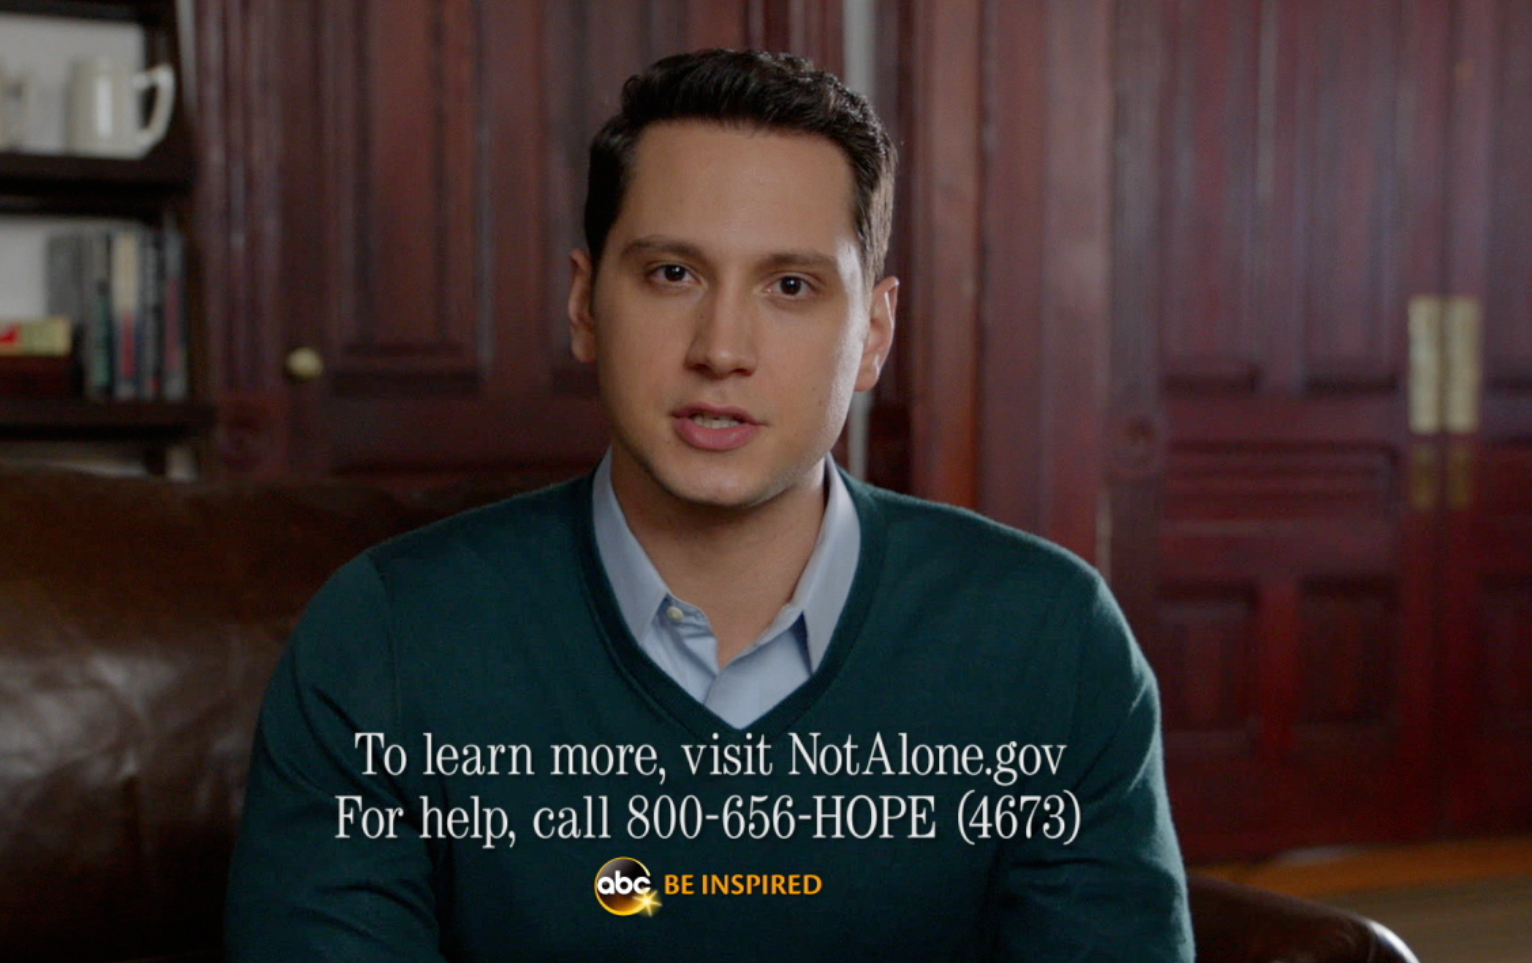  Television star Matt McGorry shares the National Sexual Assault Hotline number. Image links to a PSA in QuickTime.